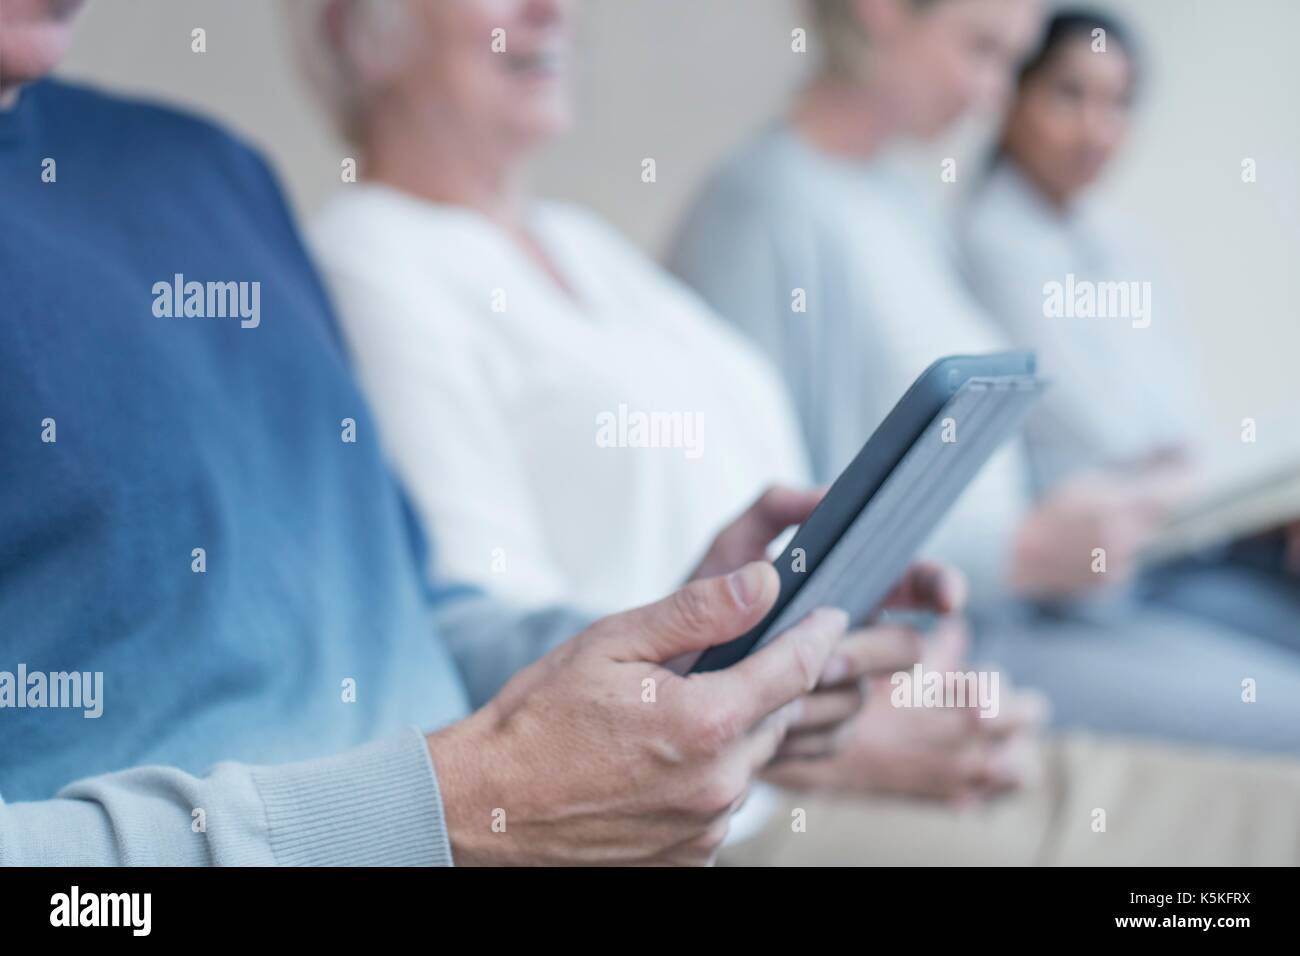 Man using digital tablet with woman in background in waiting room. Stock Photo